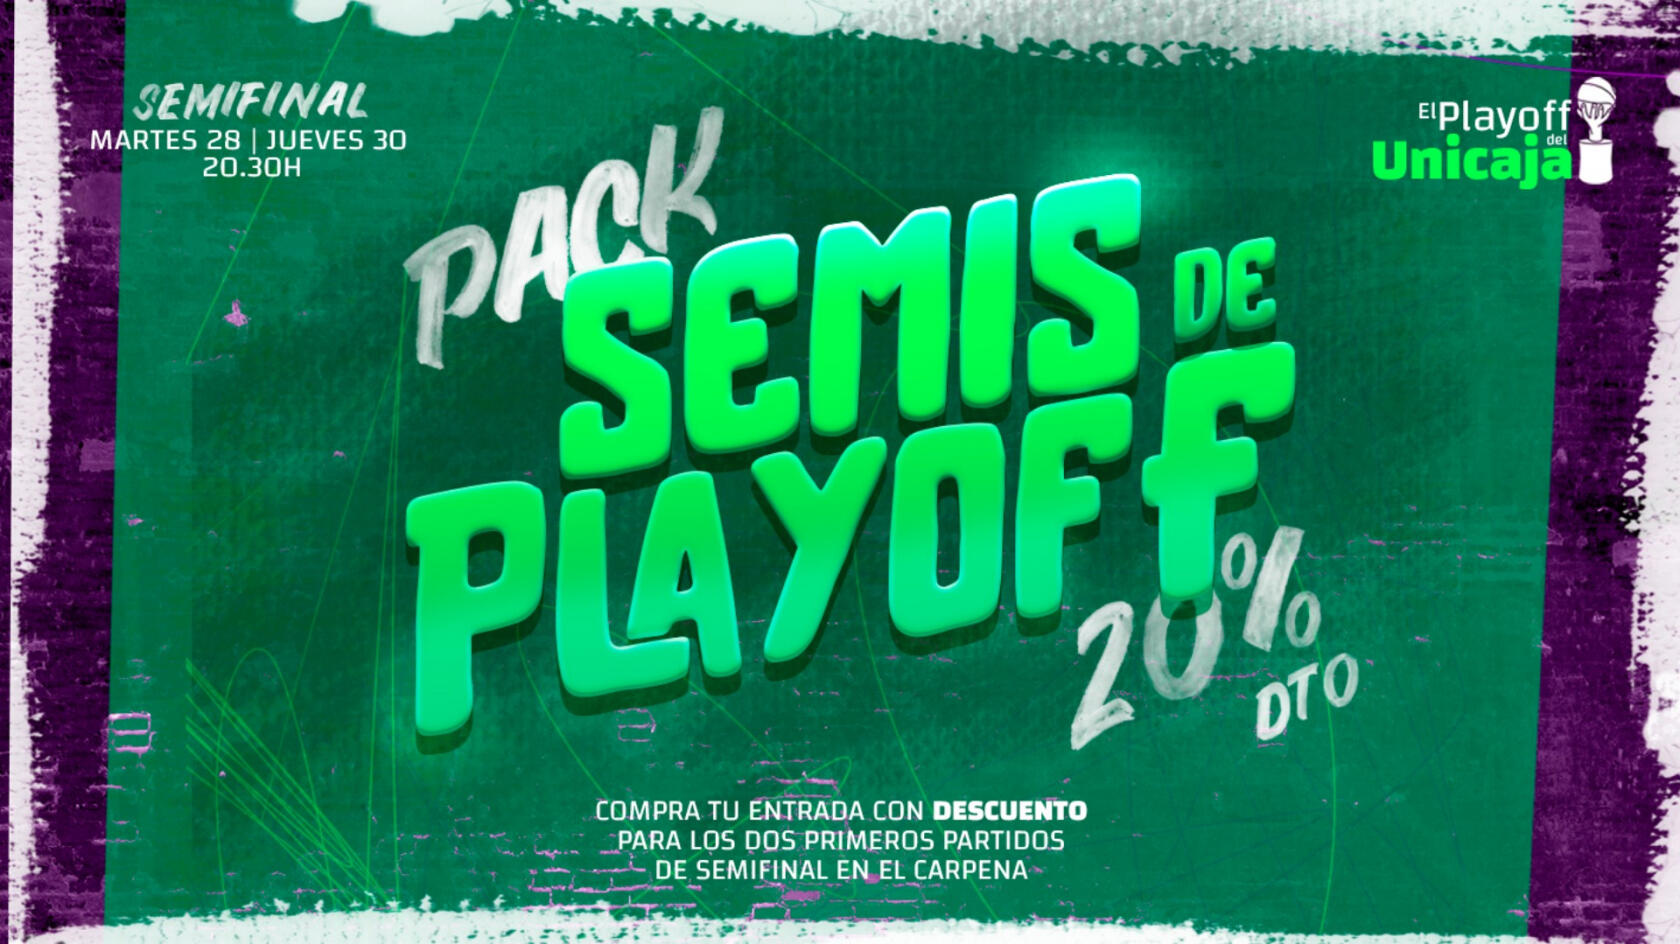 The ticket pack for the Playoff semifinals is now on sale with a 20% discount!